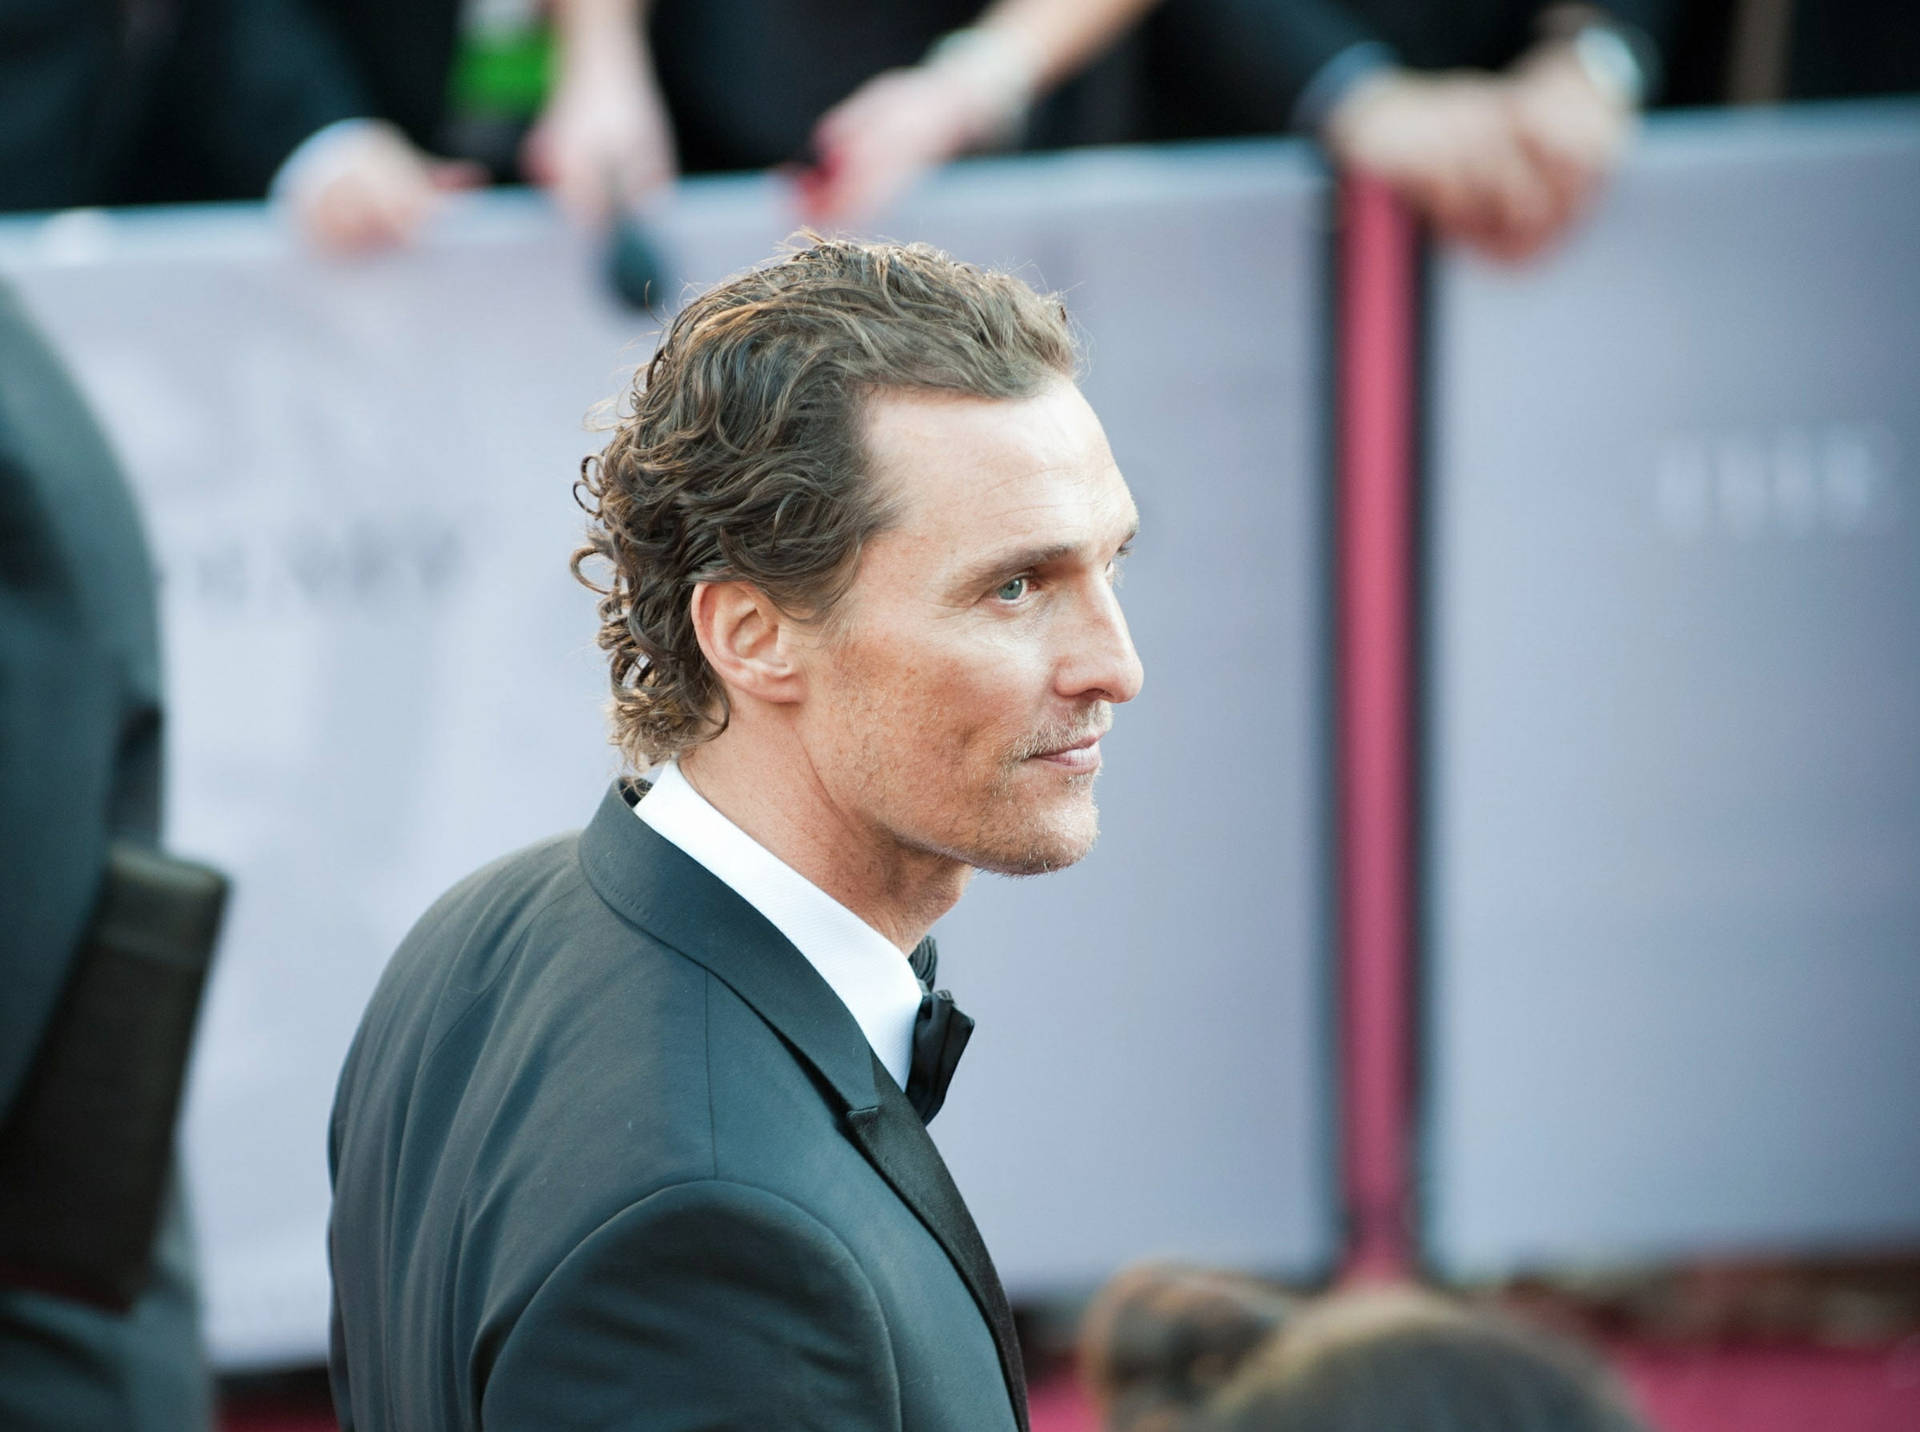 Hollywood Star Matthew McConaughey on the Red Carpet Wallpaper